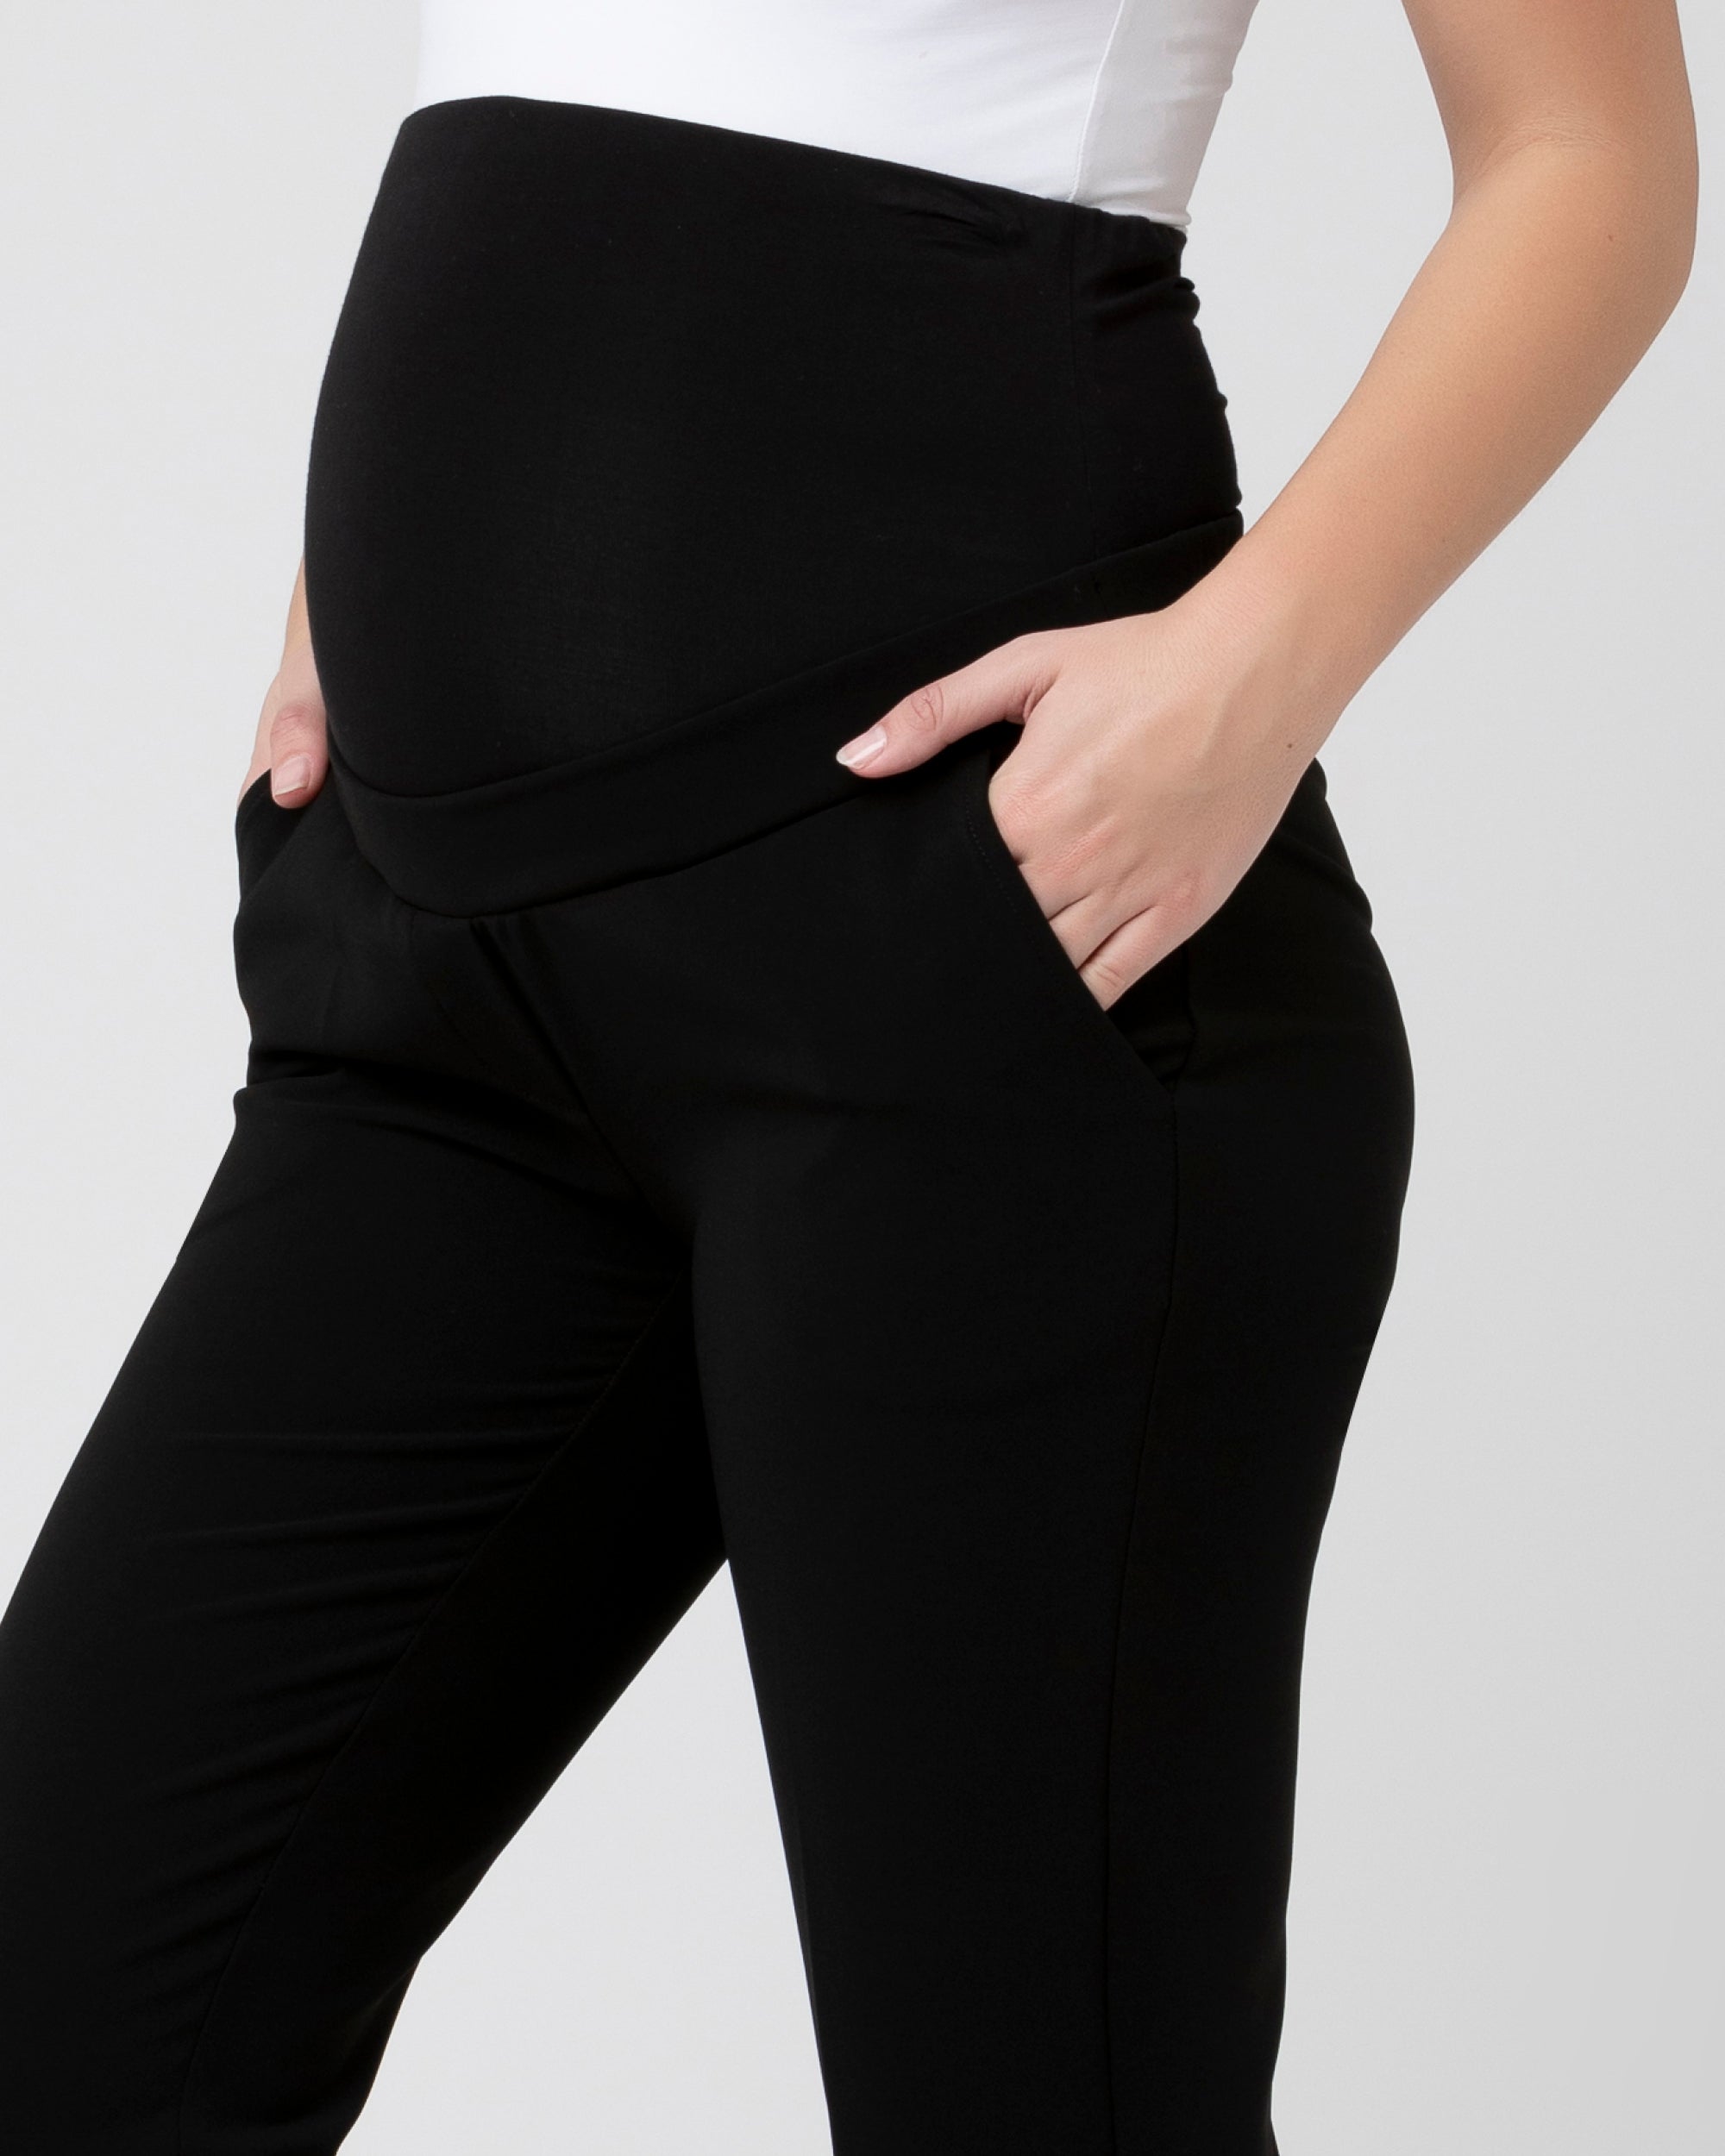 15 Stylish Pairs of Maternity Work Pants to Rock During Pregnancy